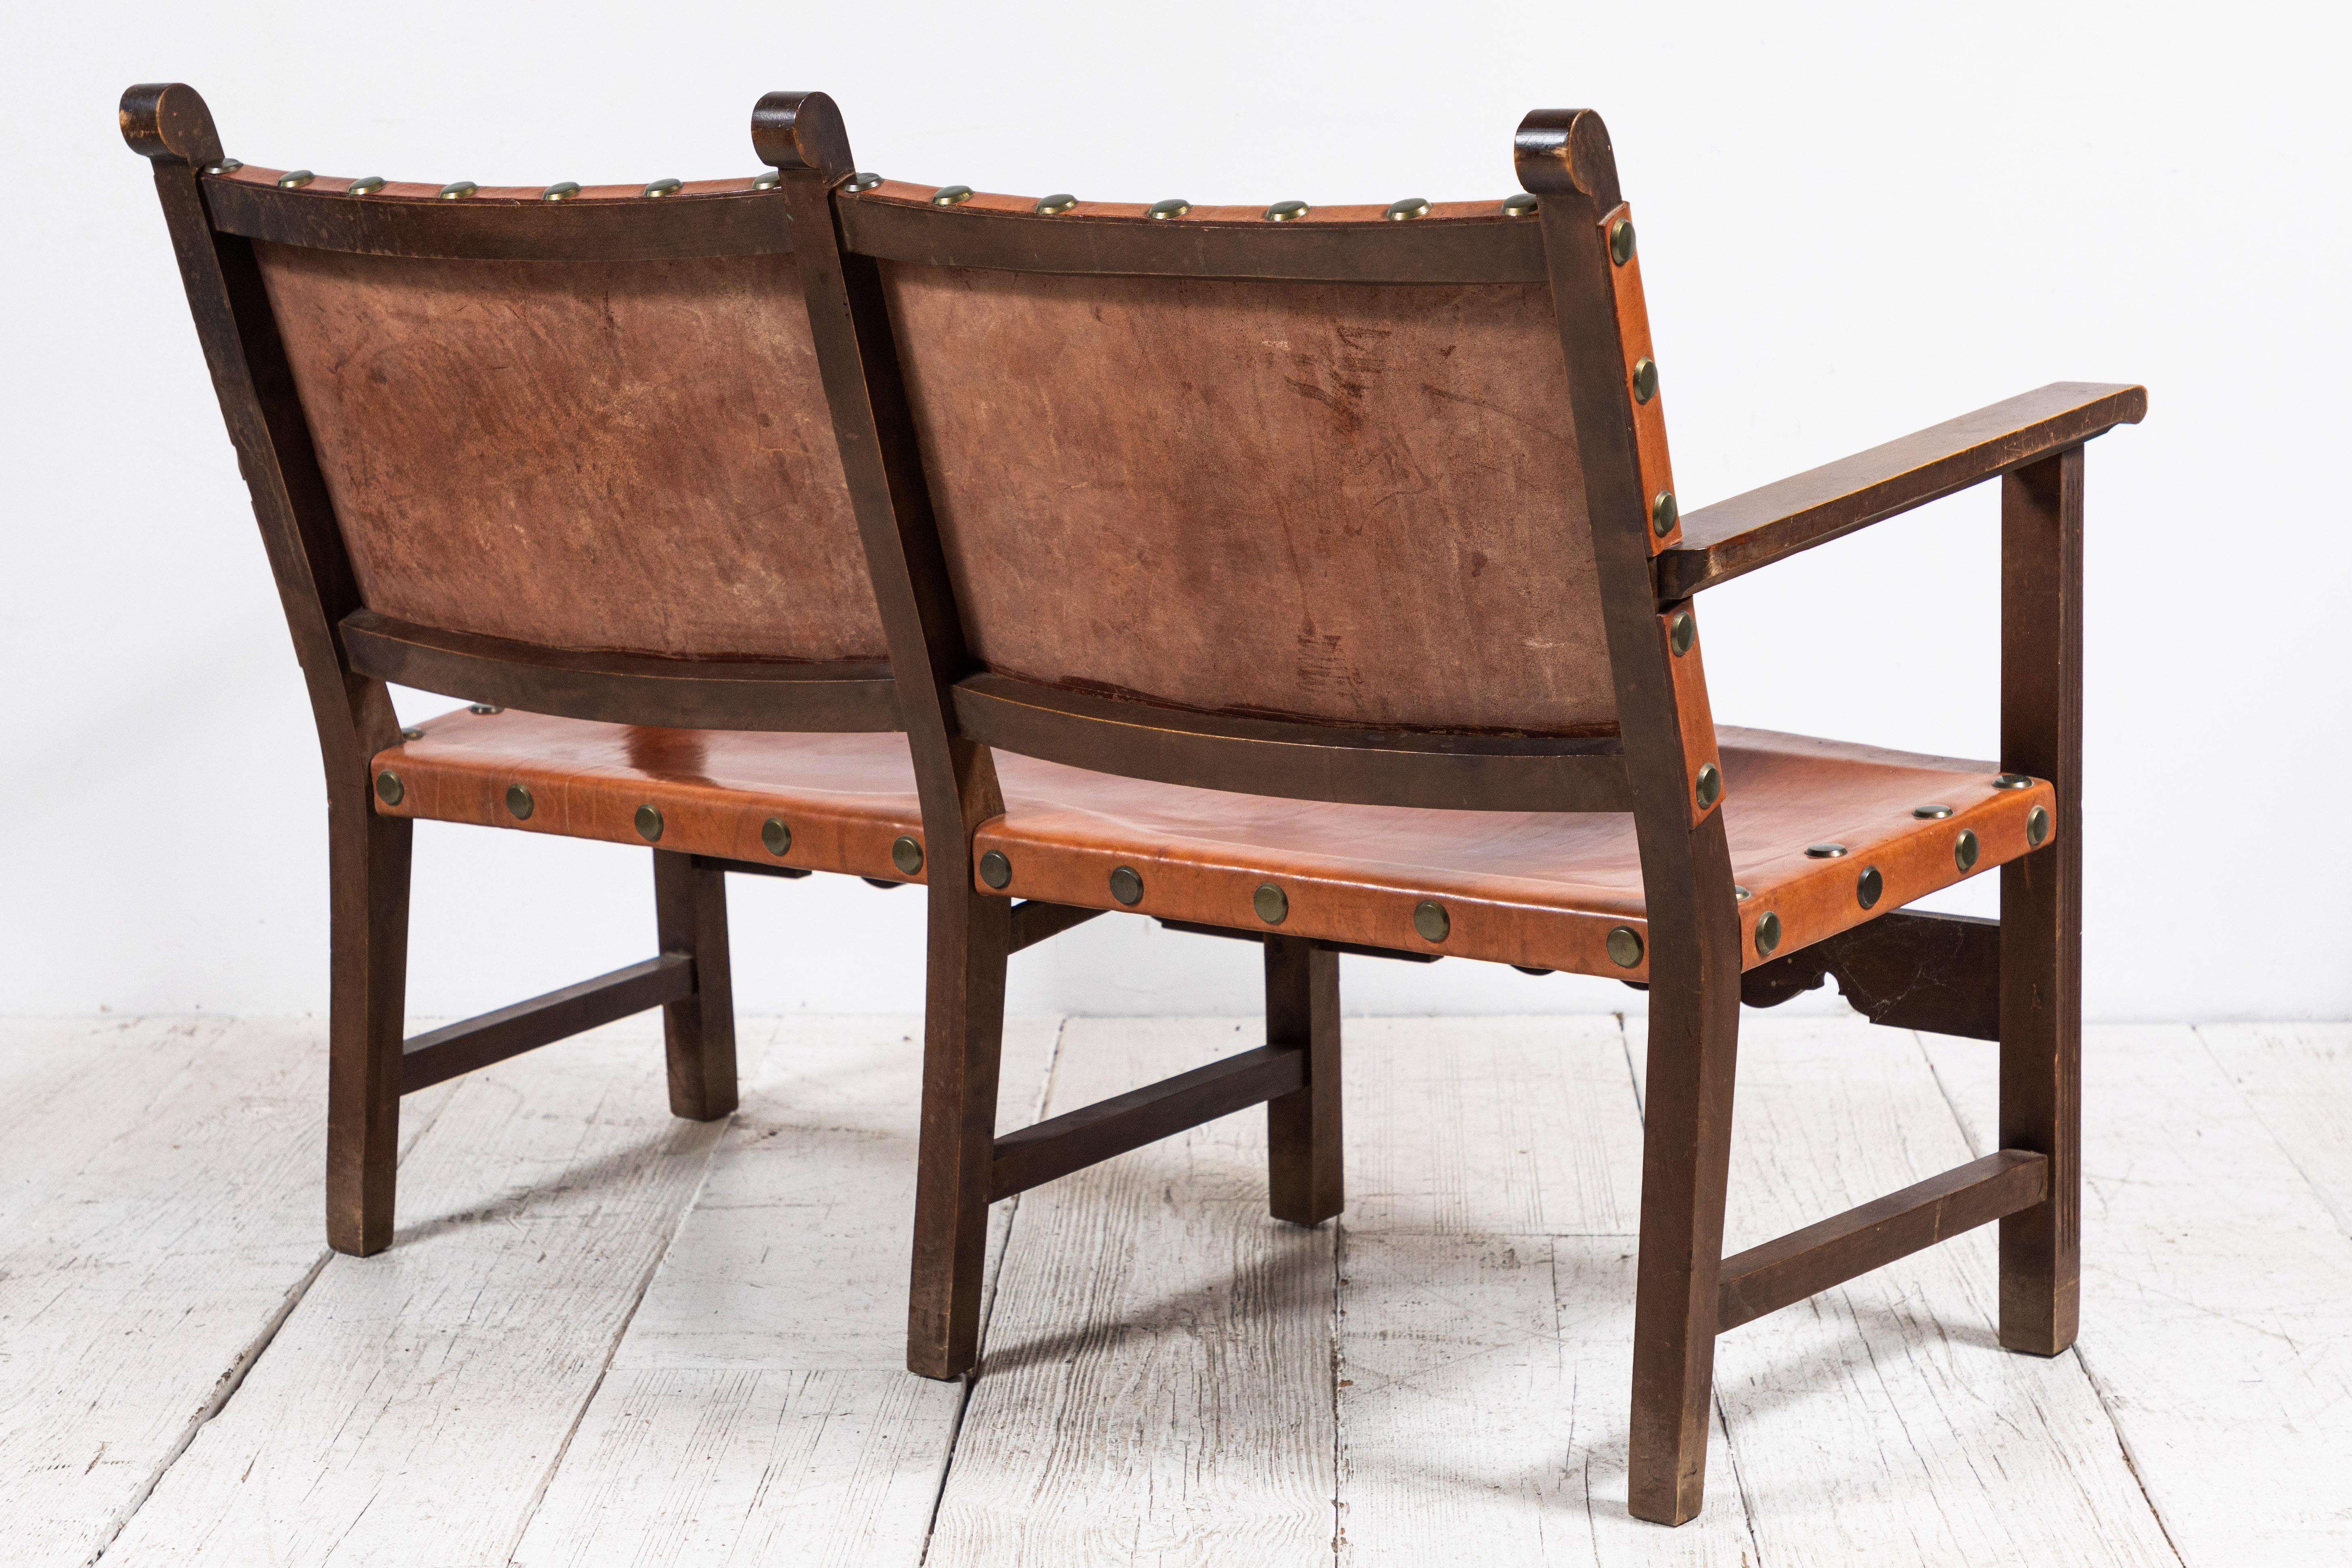 Spanish Leather Bench with with Wooden Frame im Zustand „Gut“ in Los Angeles, CA